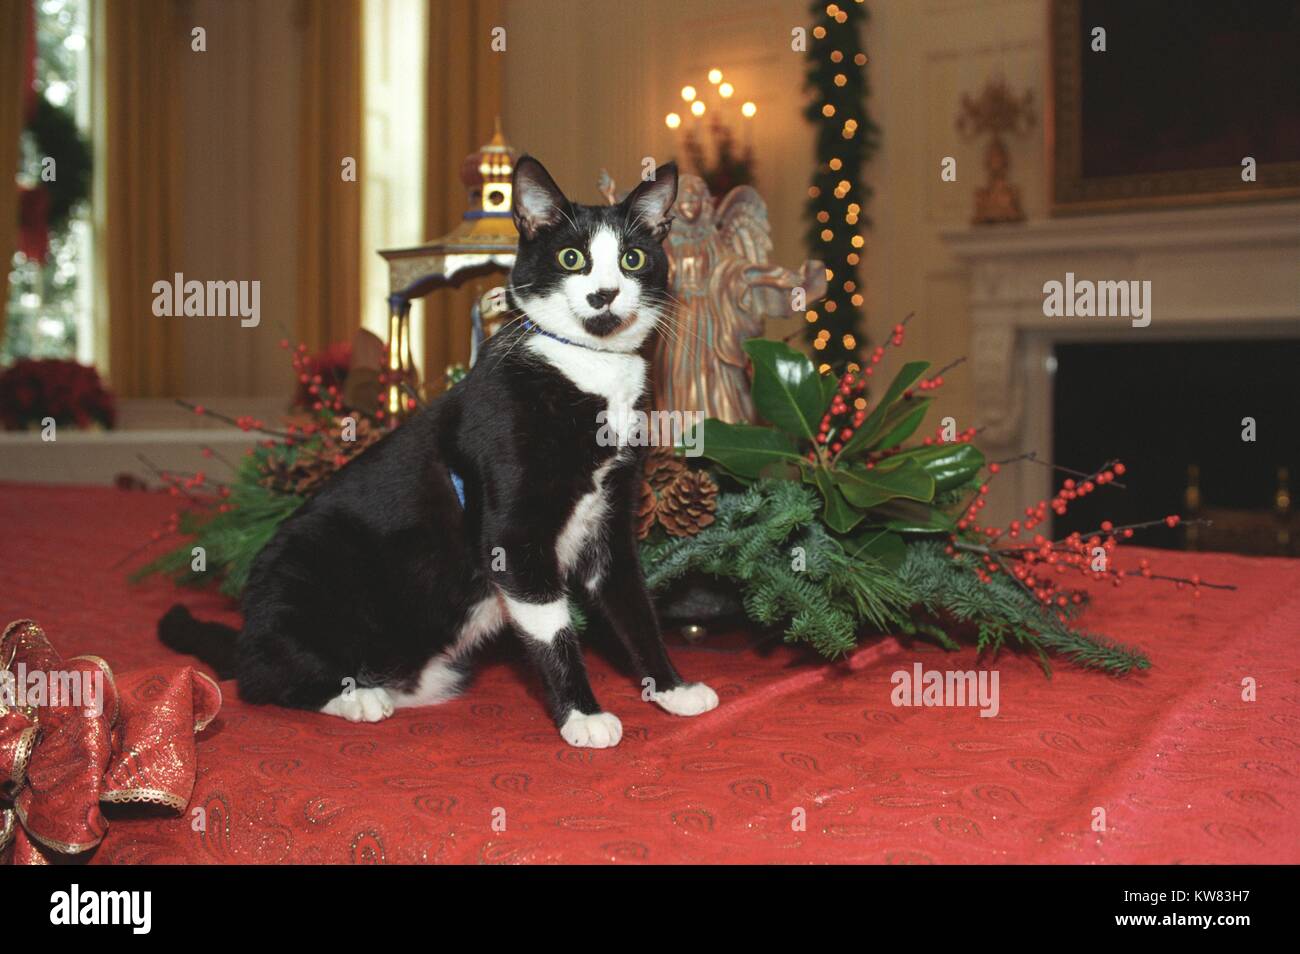 Socks the Cat, the First Pet of President Bill Clinton and First Wife Hillary Rodham Clinton, with black fur, white face, and amber eyes, standing and posing on top of a red table cloth beside Christmas decorations at the White House, including bows, leaves, wreathes, lighs, and an angel, Washington, District of Columbia, December 5, 1993. Stock Photo